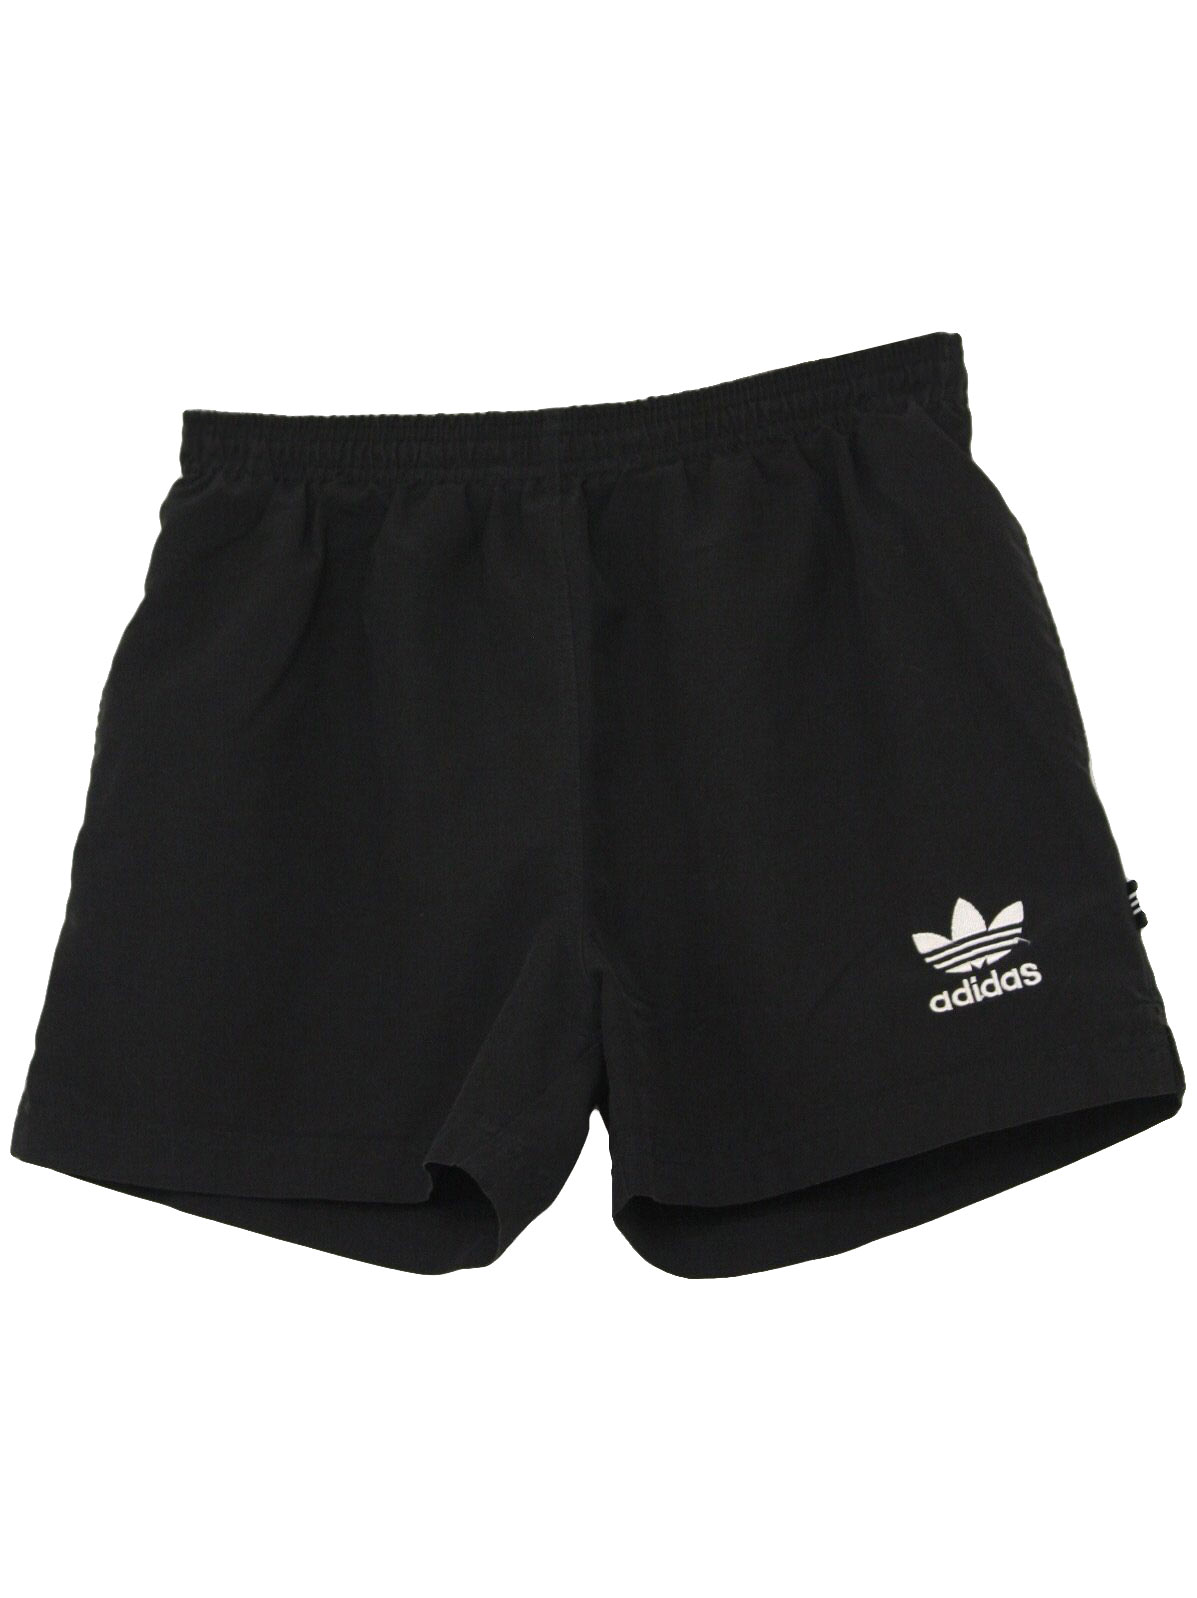 1990's Shorts (Adidas): 90s -Adidas- Mens black polyester wicked 90s ...